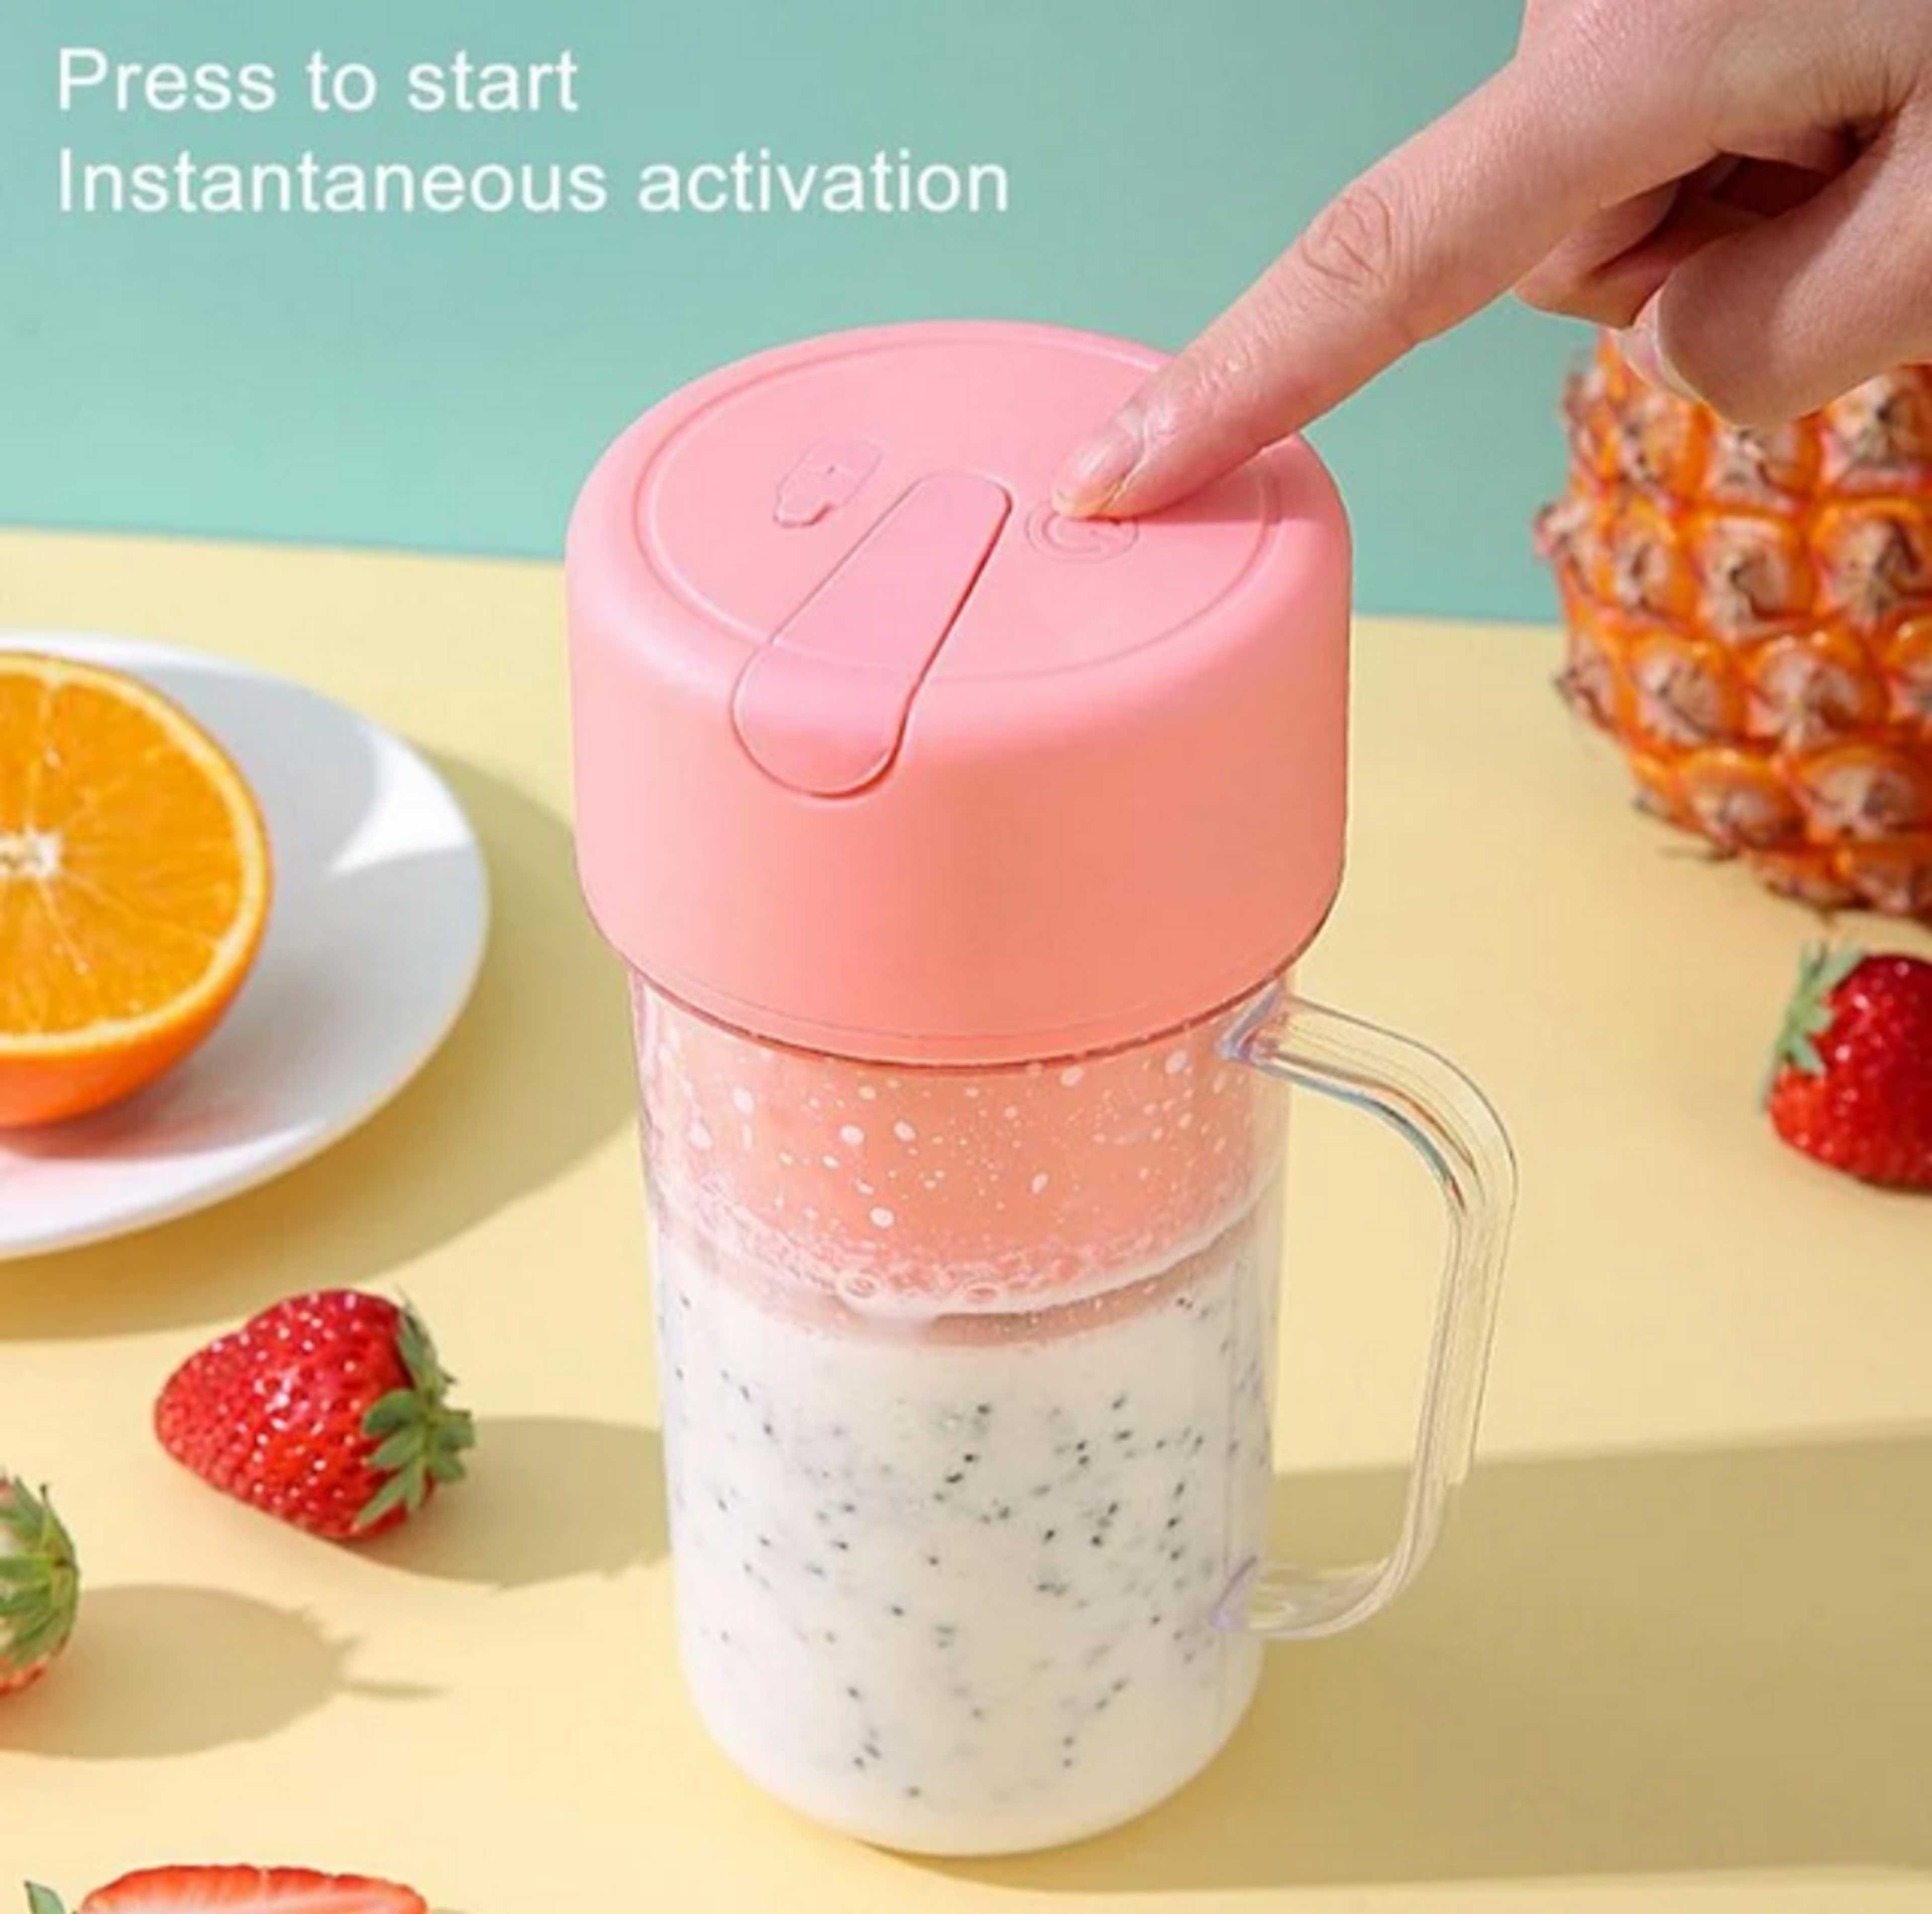 500ml Juicer Portable Juicing (machine) Cup Home Mini Cordless Crushed Ice Squeezed Machine Juice USB Charging Vegetable Food Processor